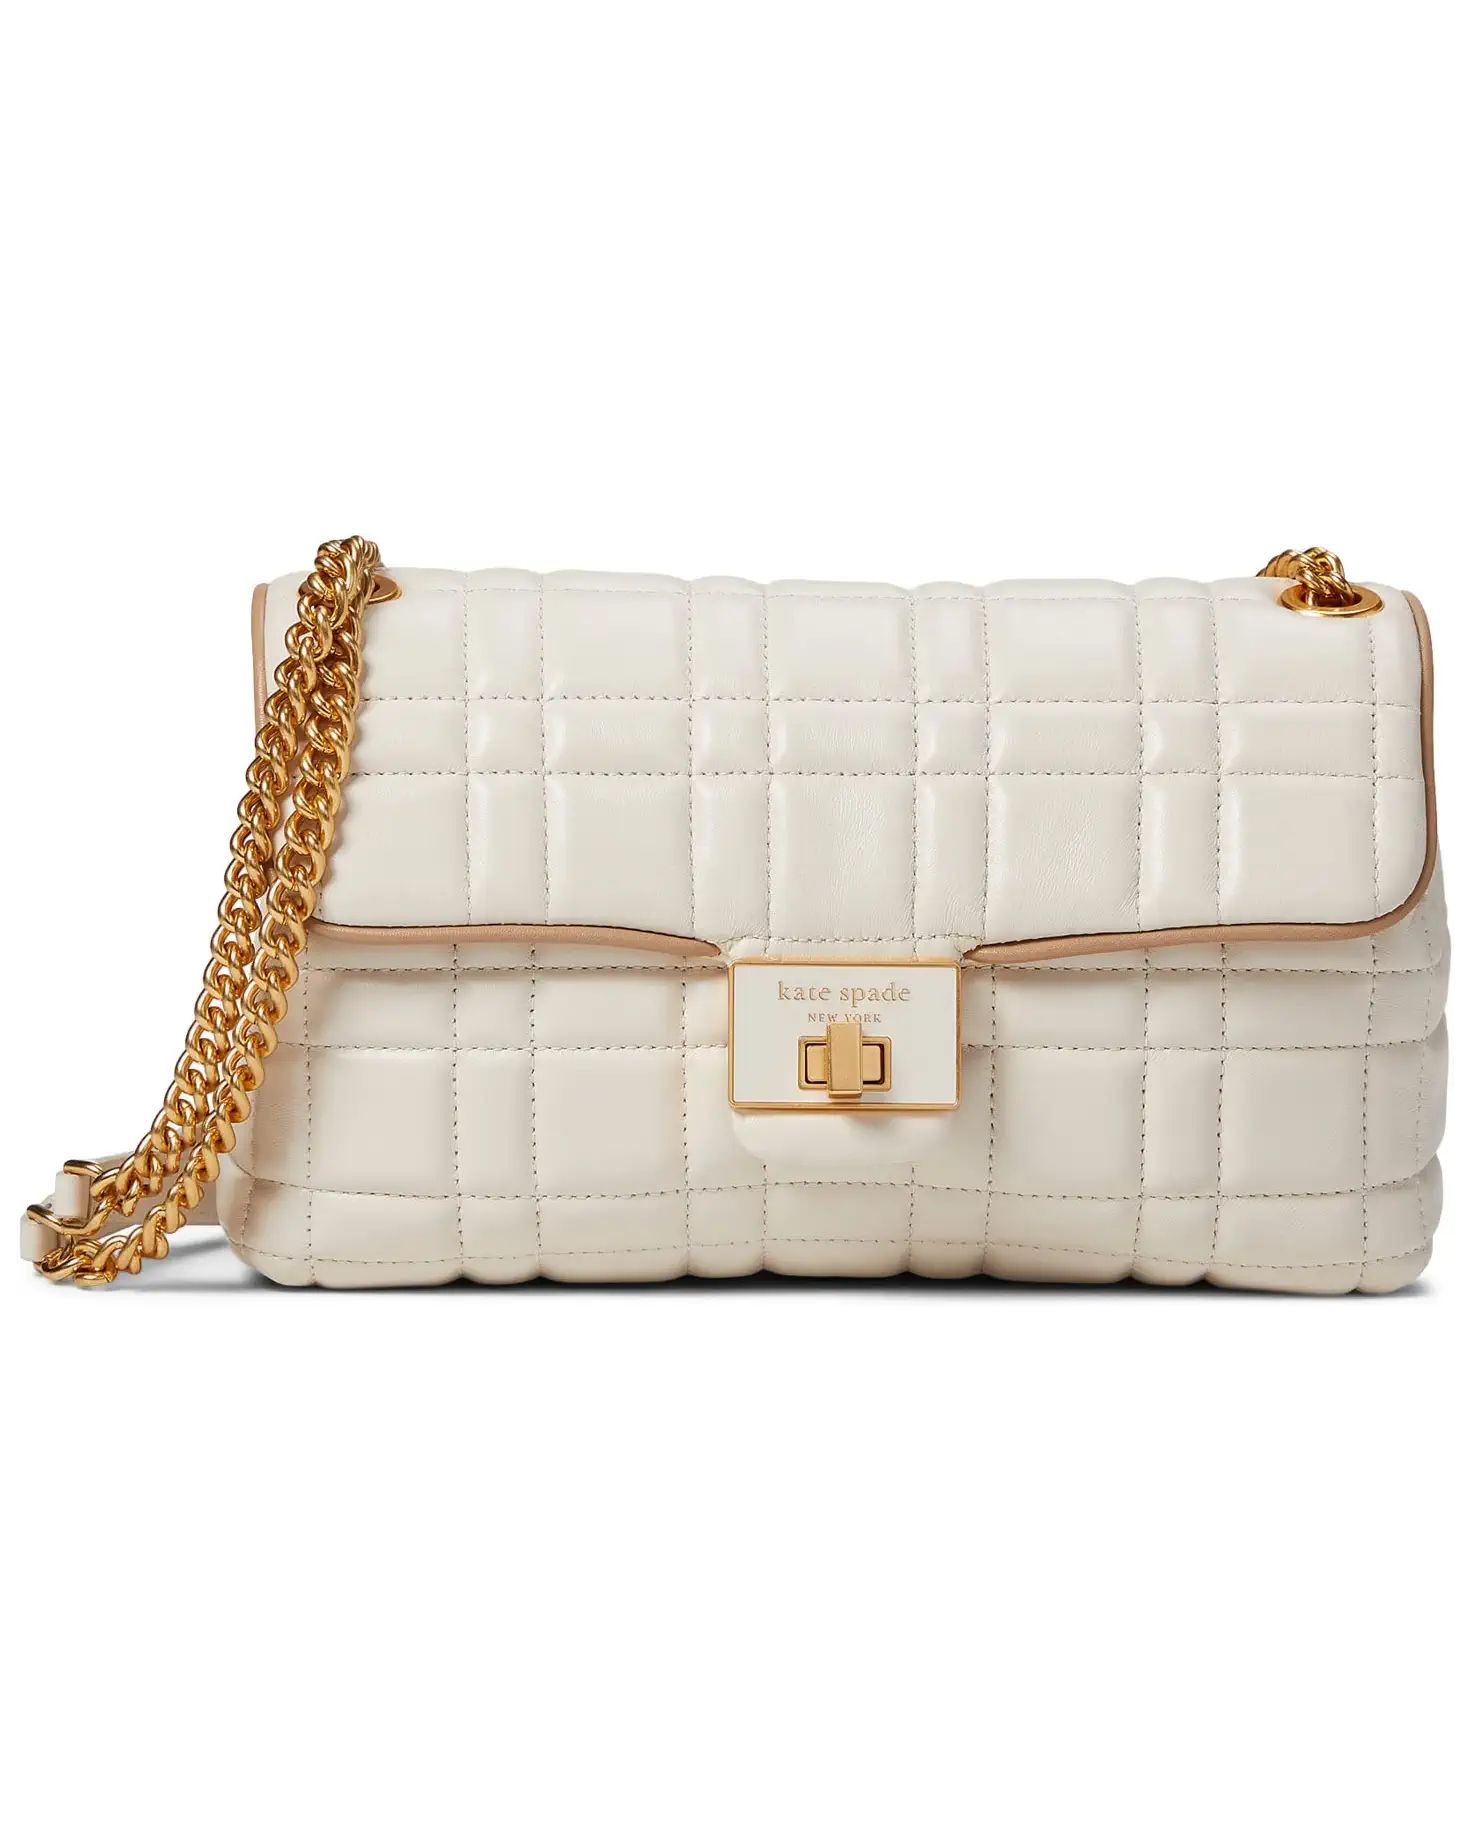 Kate Spade New York Evelyn Quilted Leather Medium Convertible Shoulder Bag | Zappos